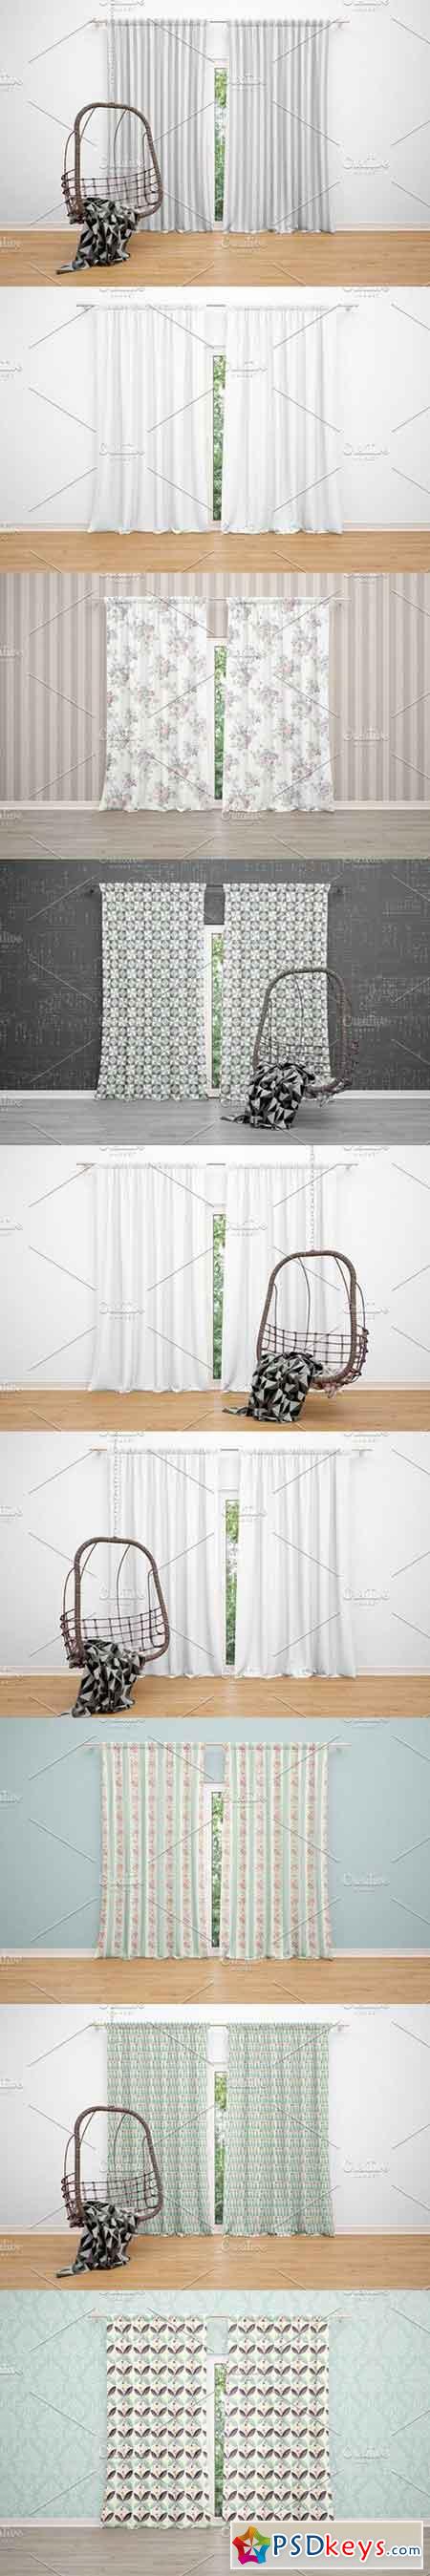 Download Curtains Mockup 1656261 » Free Download Photoshop Vector ...